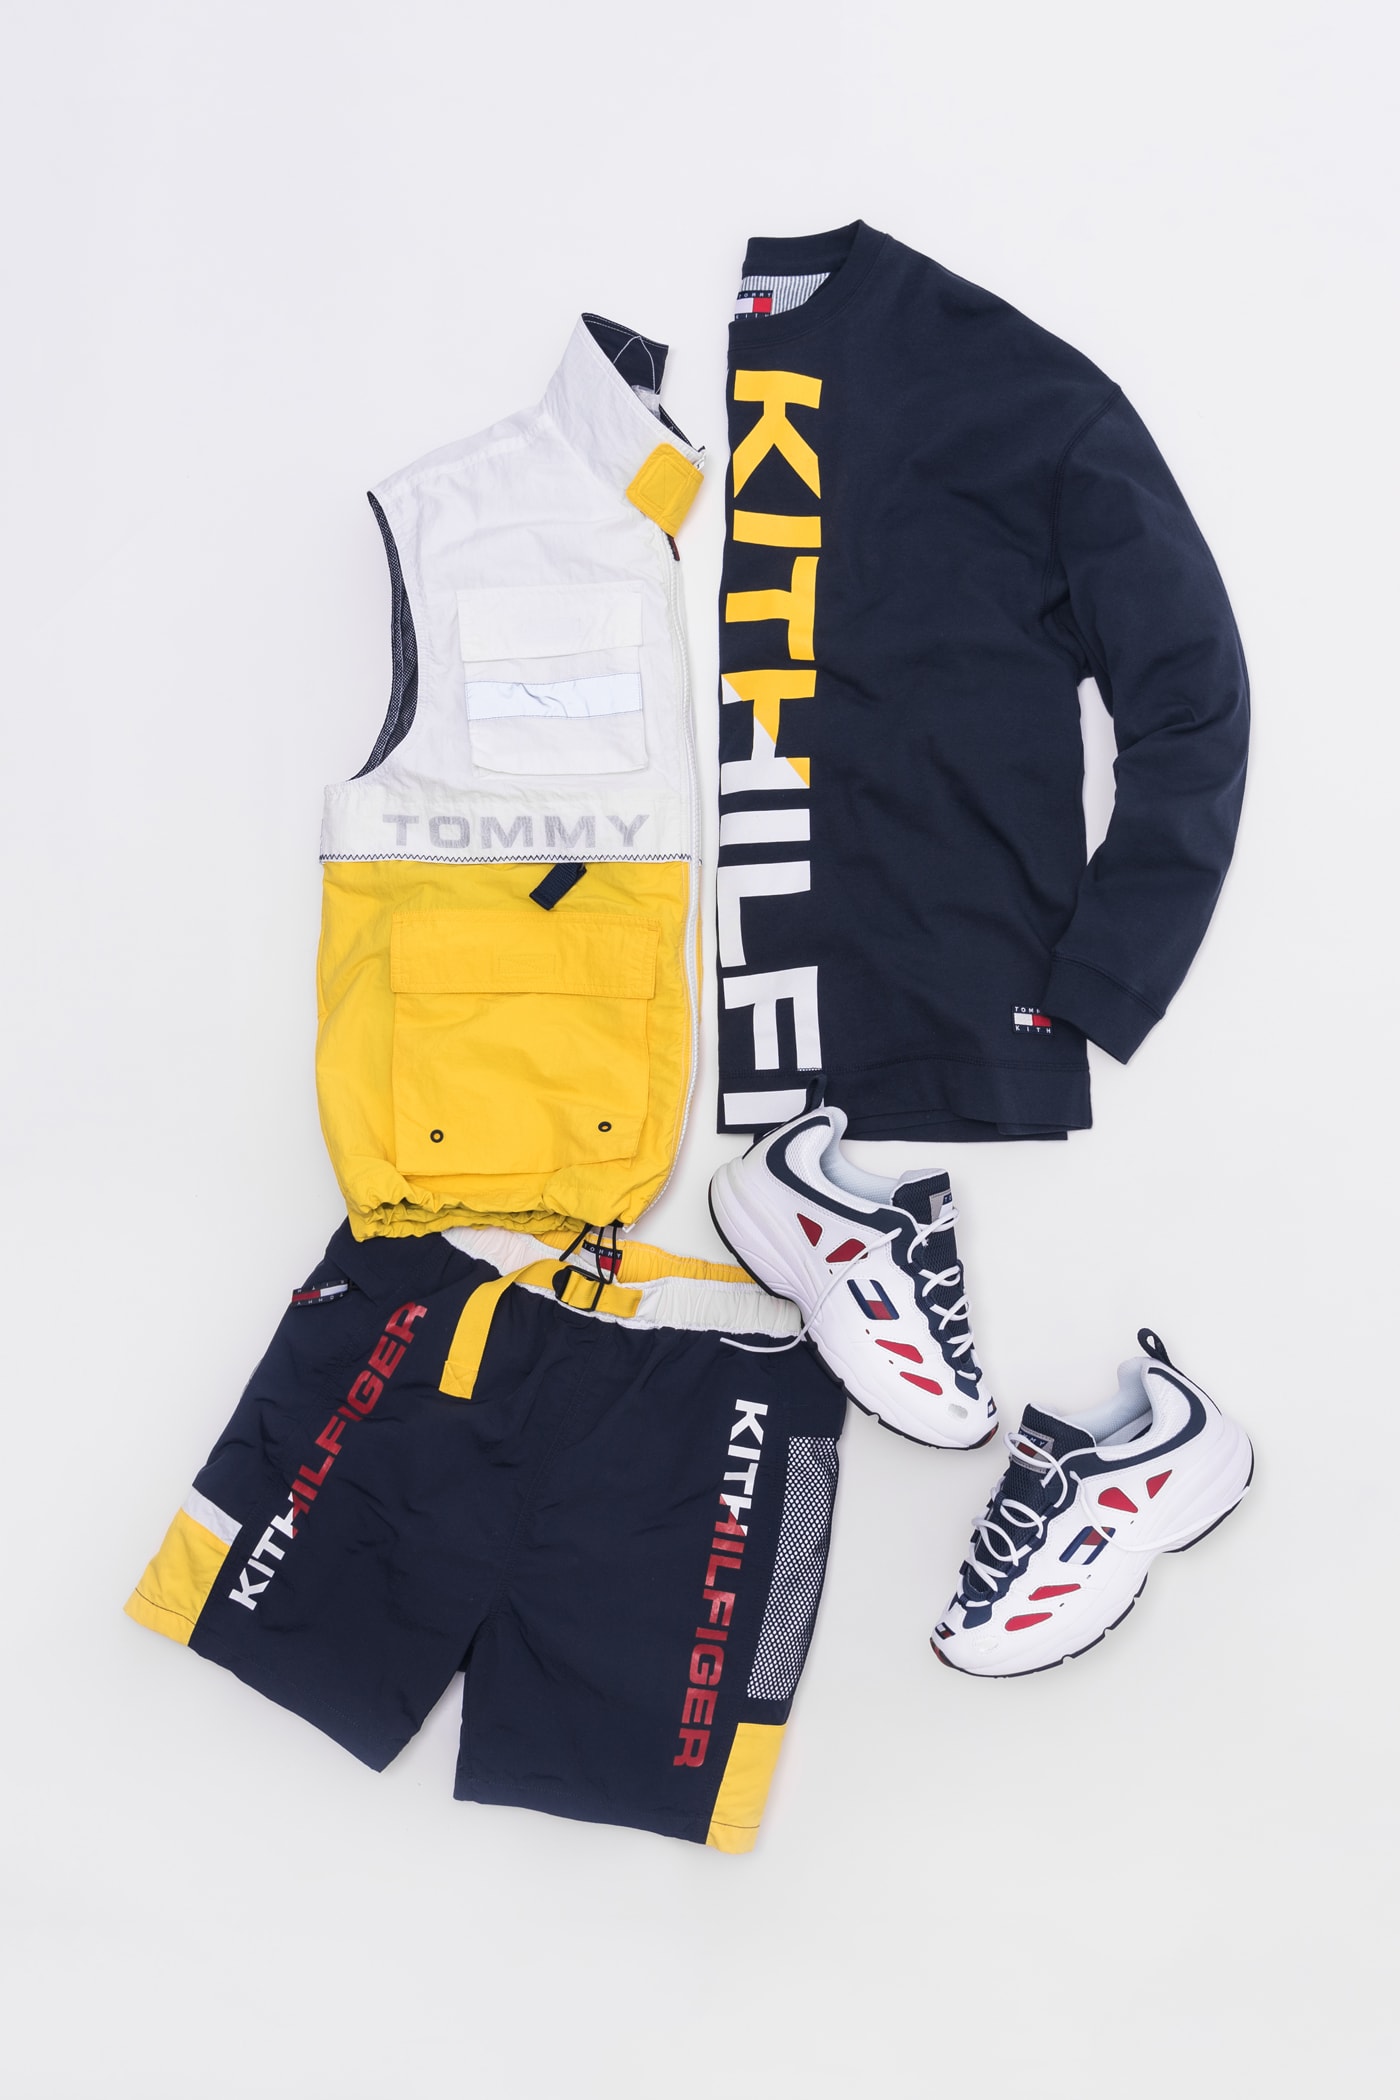 KITH x Tommy Hilifiger Capsule Collection Vest White Yellow Shirt Shorts Bue